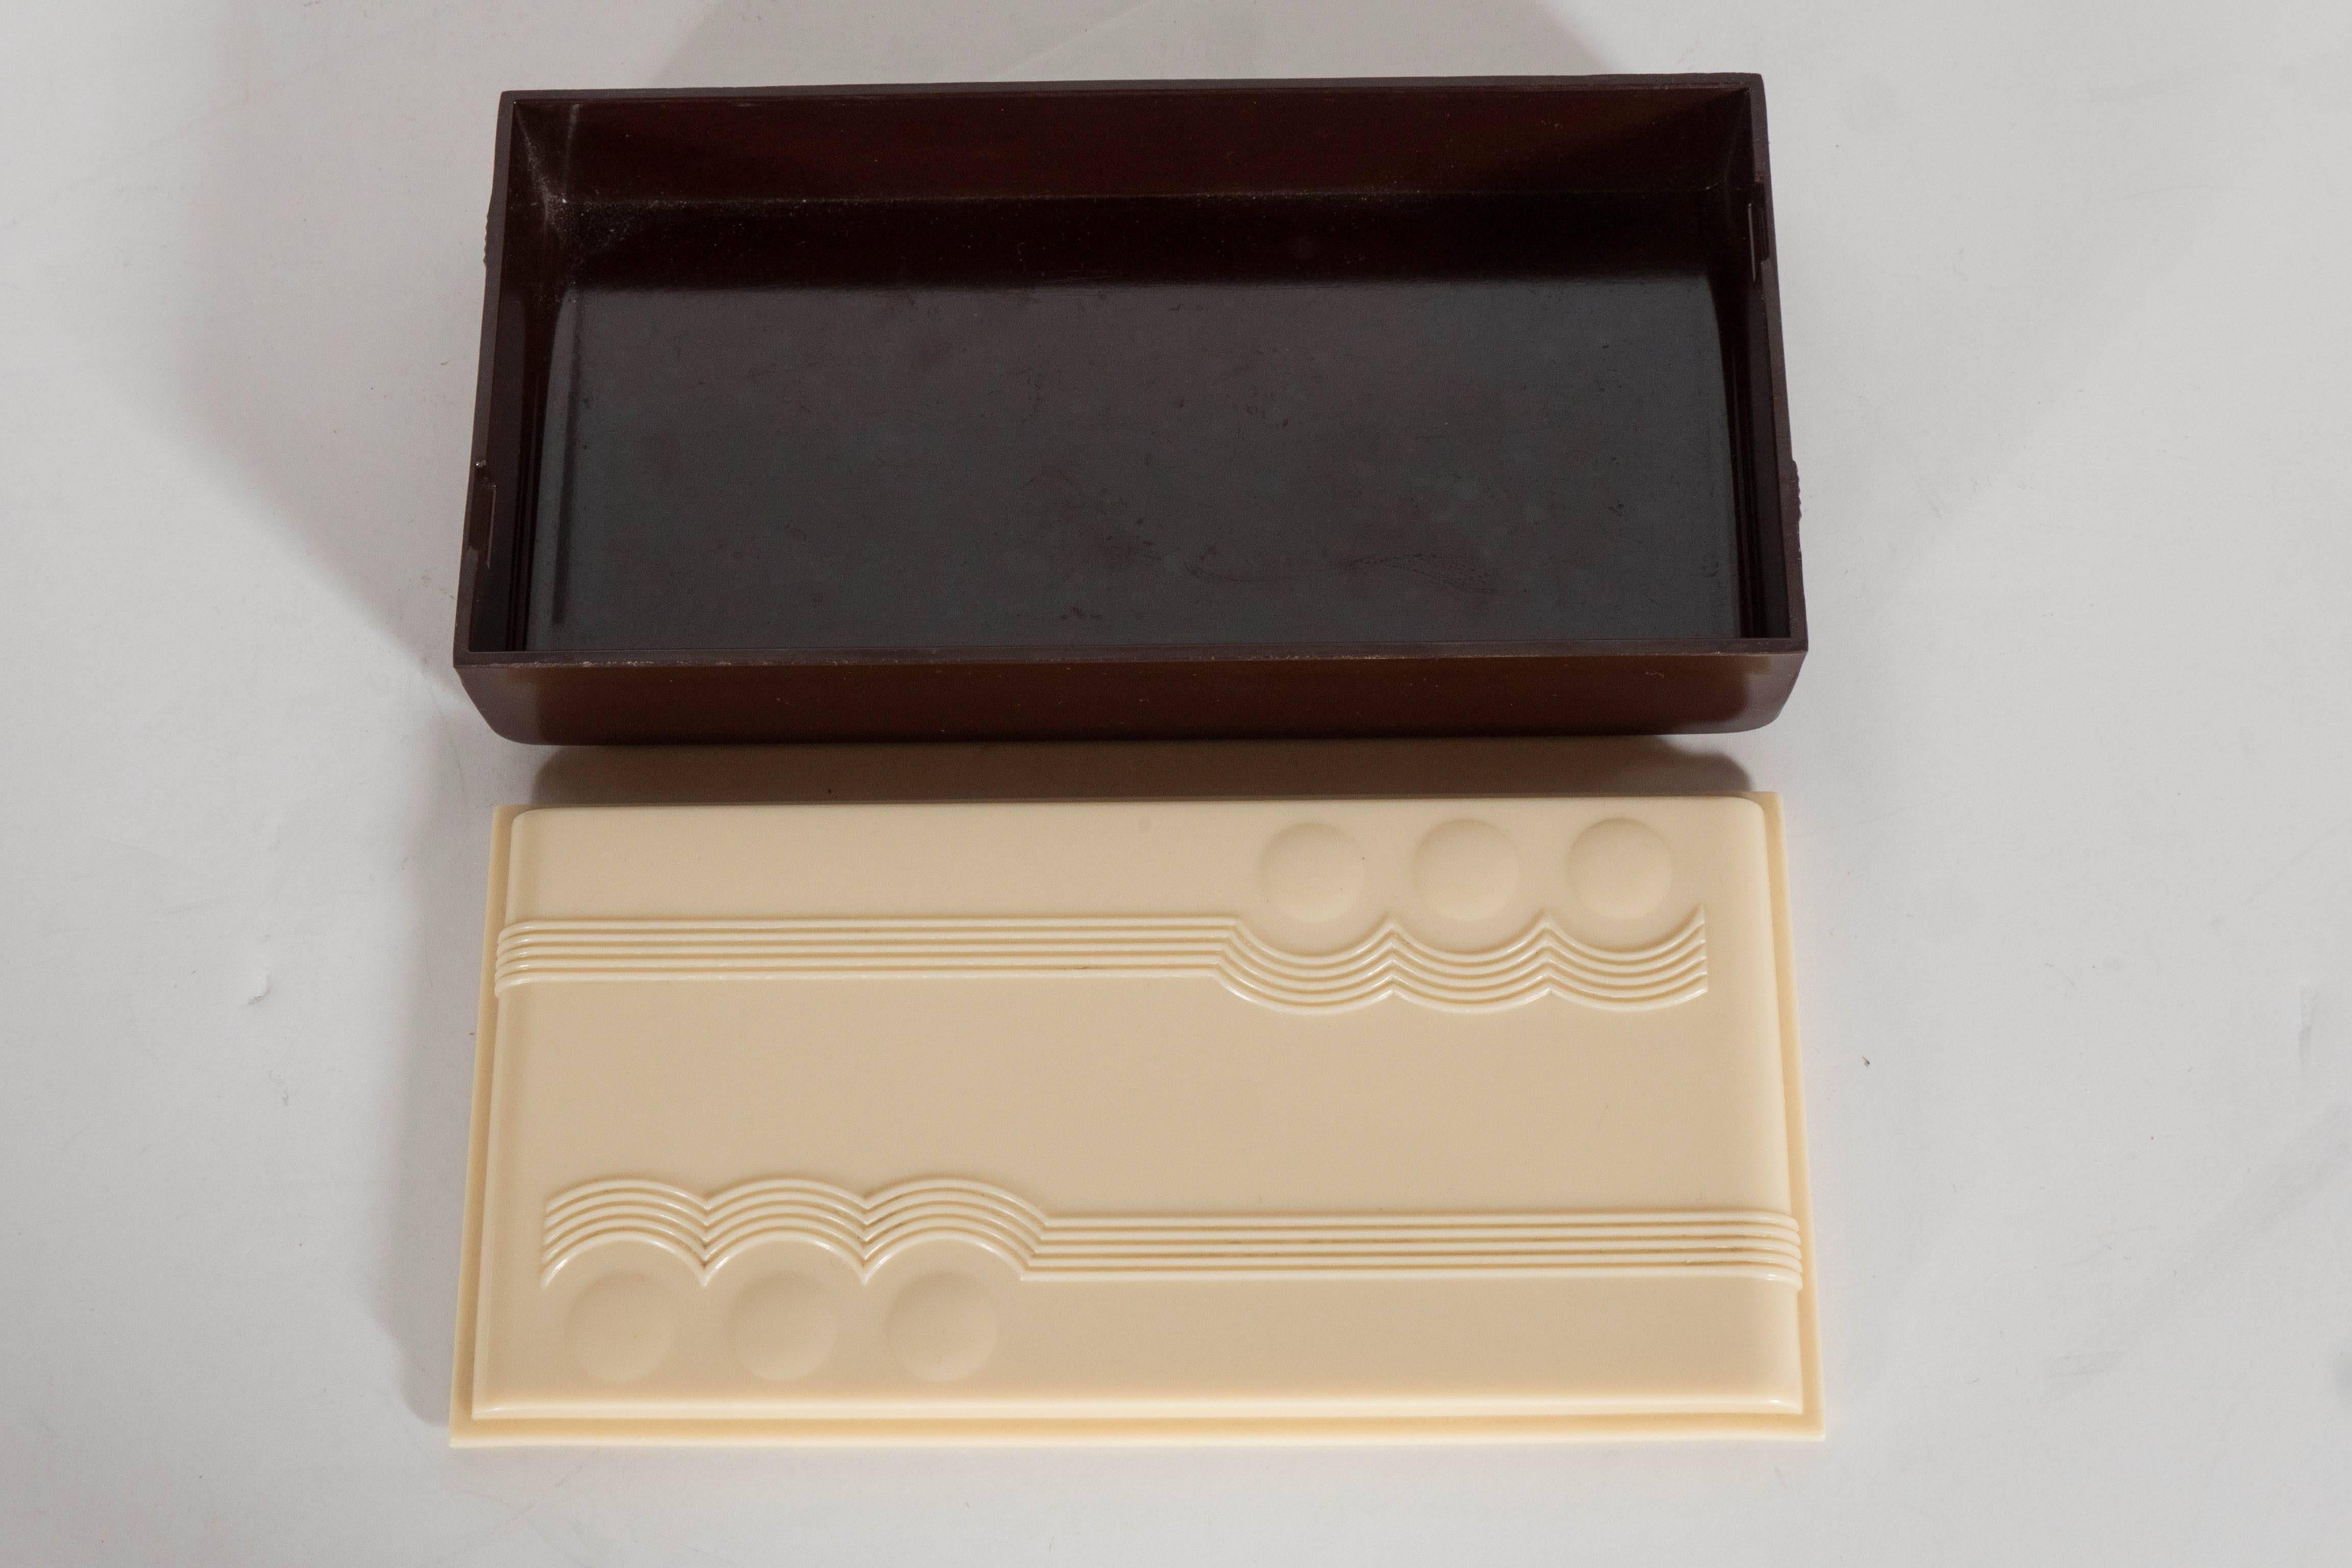 American Art Deco Two-Tone Bakelite Box with Detailing by Parker Box Company 1